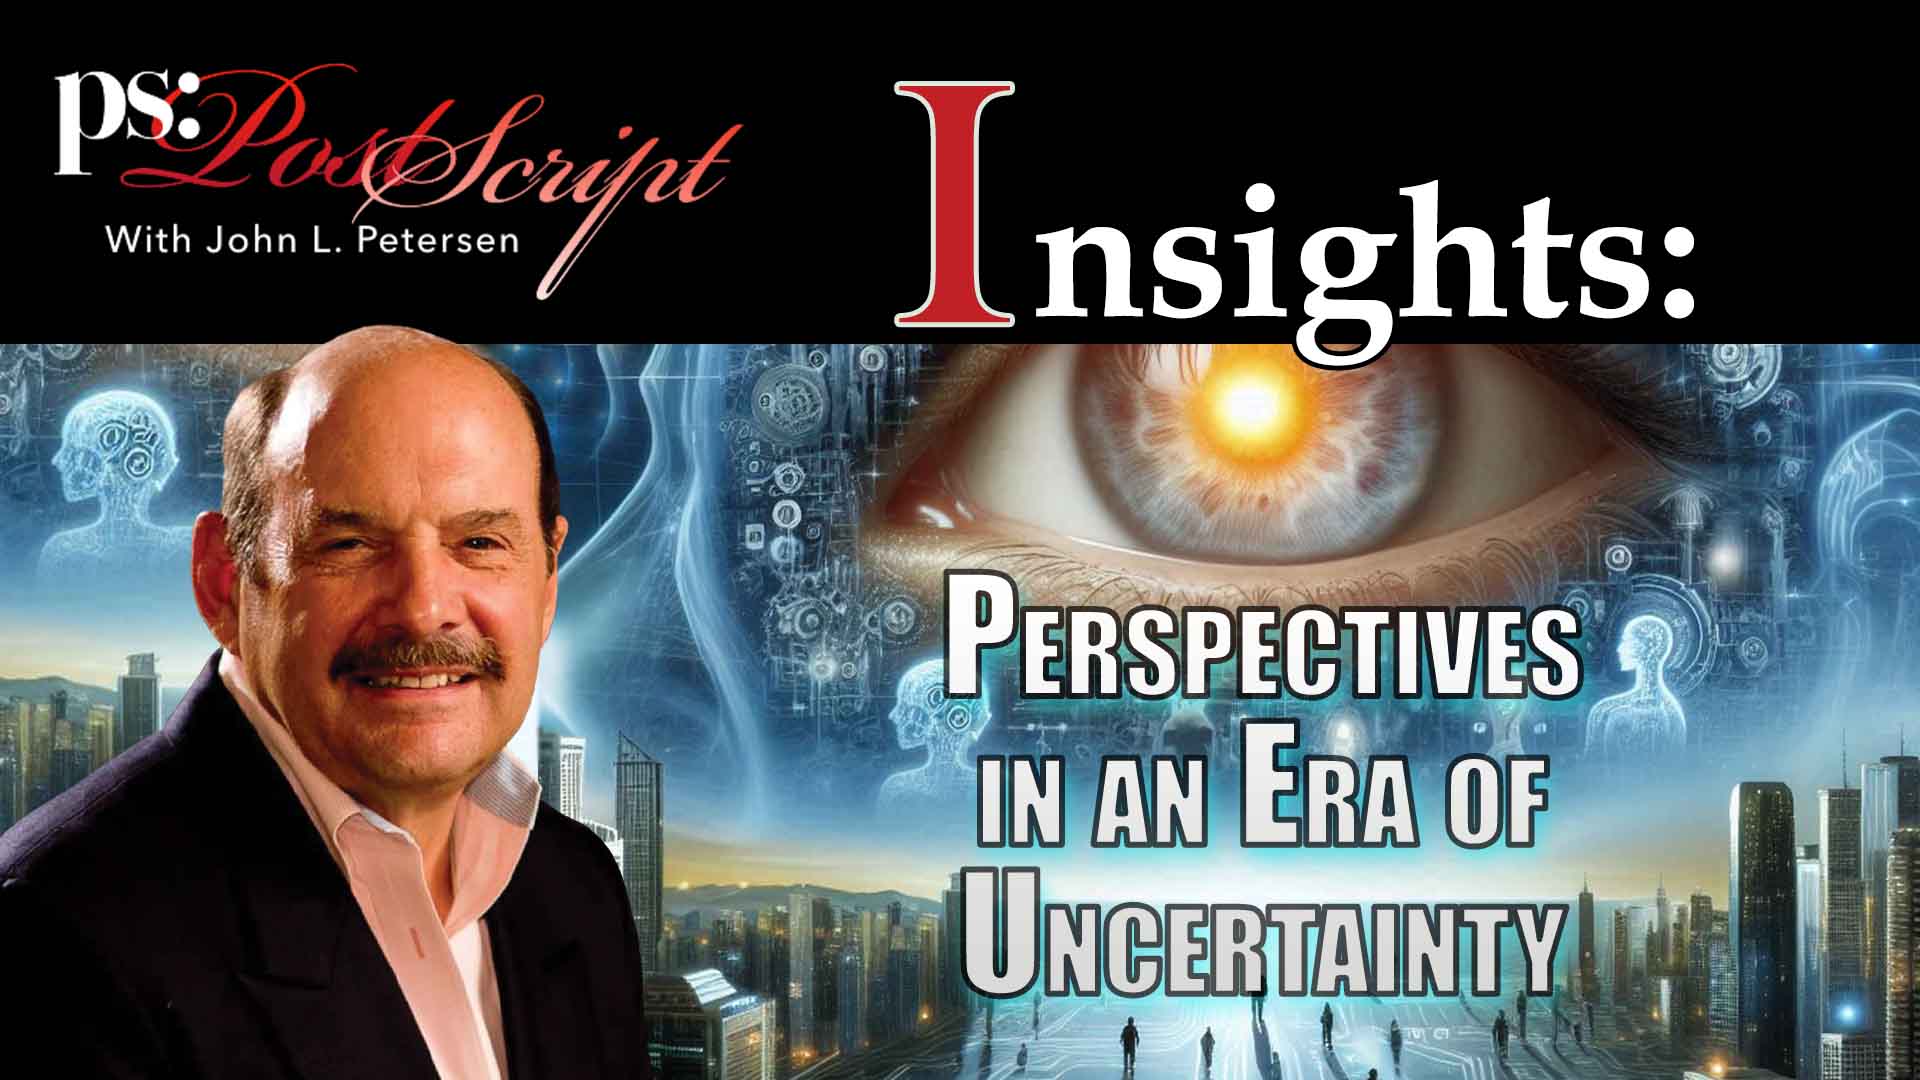 PostScript Insight - Perspectives in an Era of Uncertainty